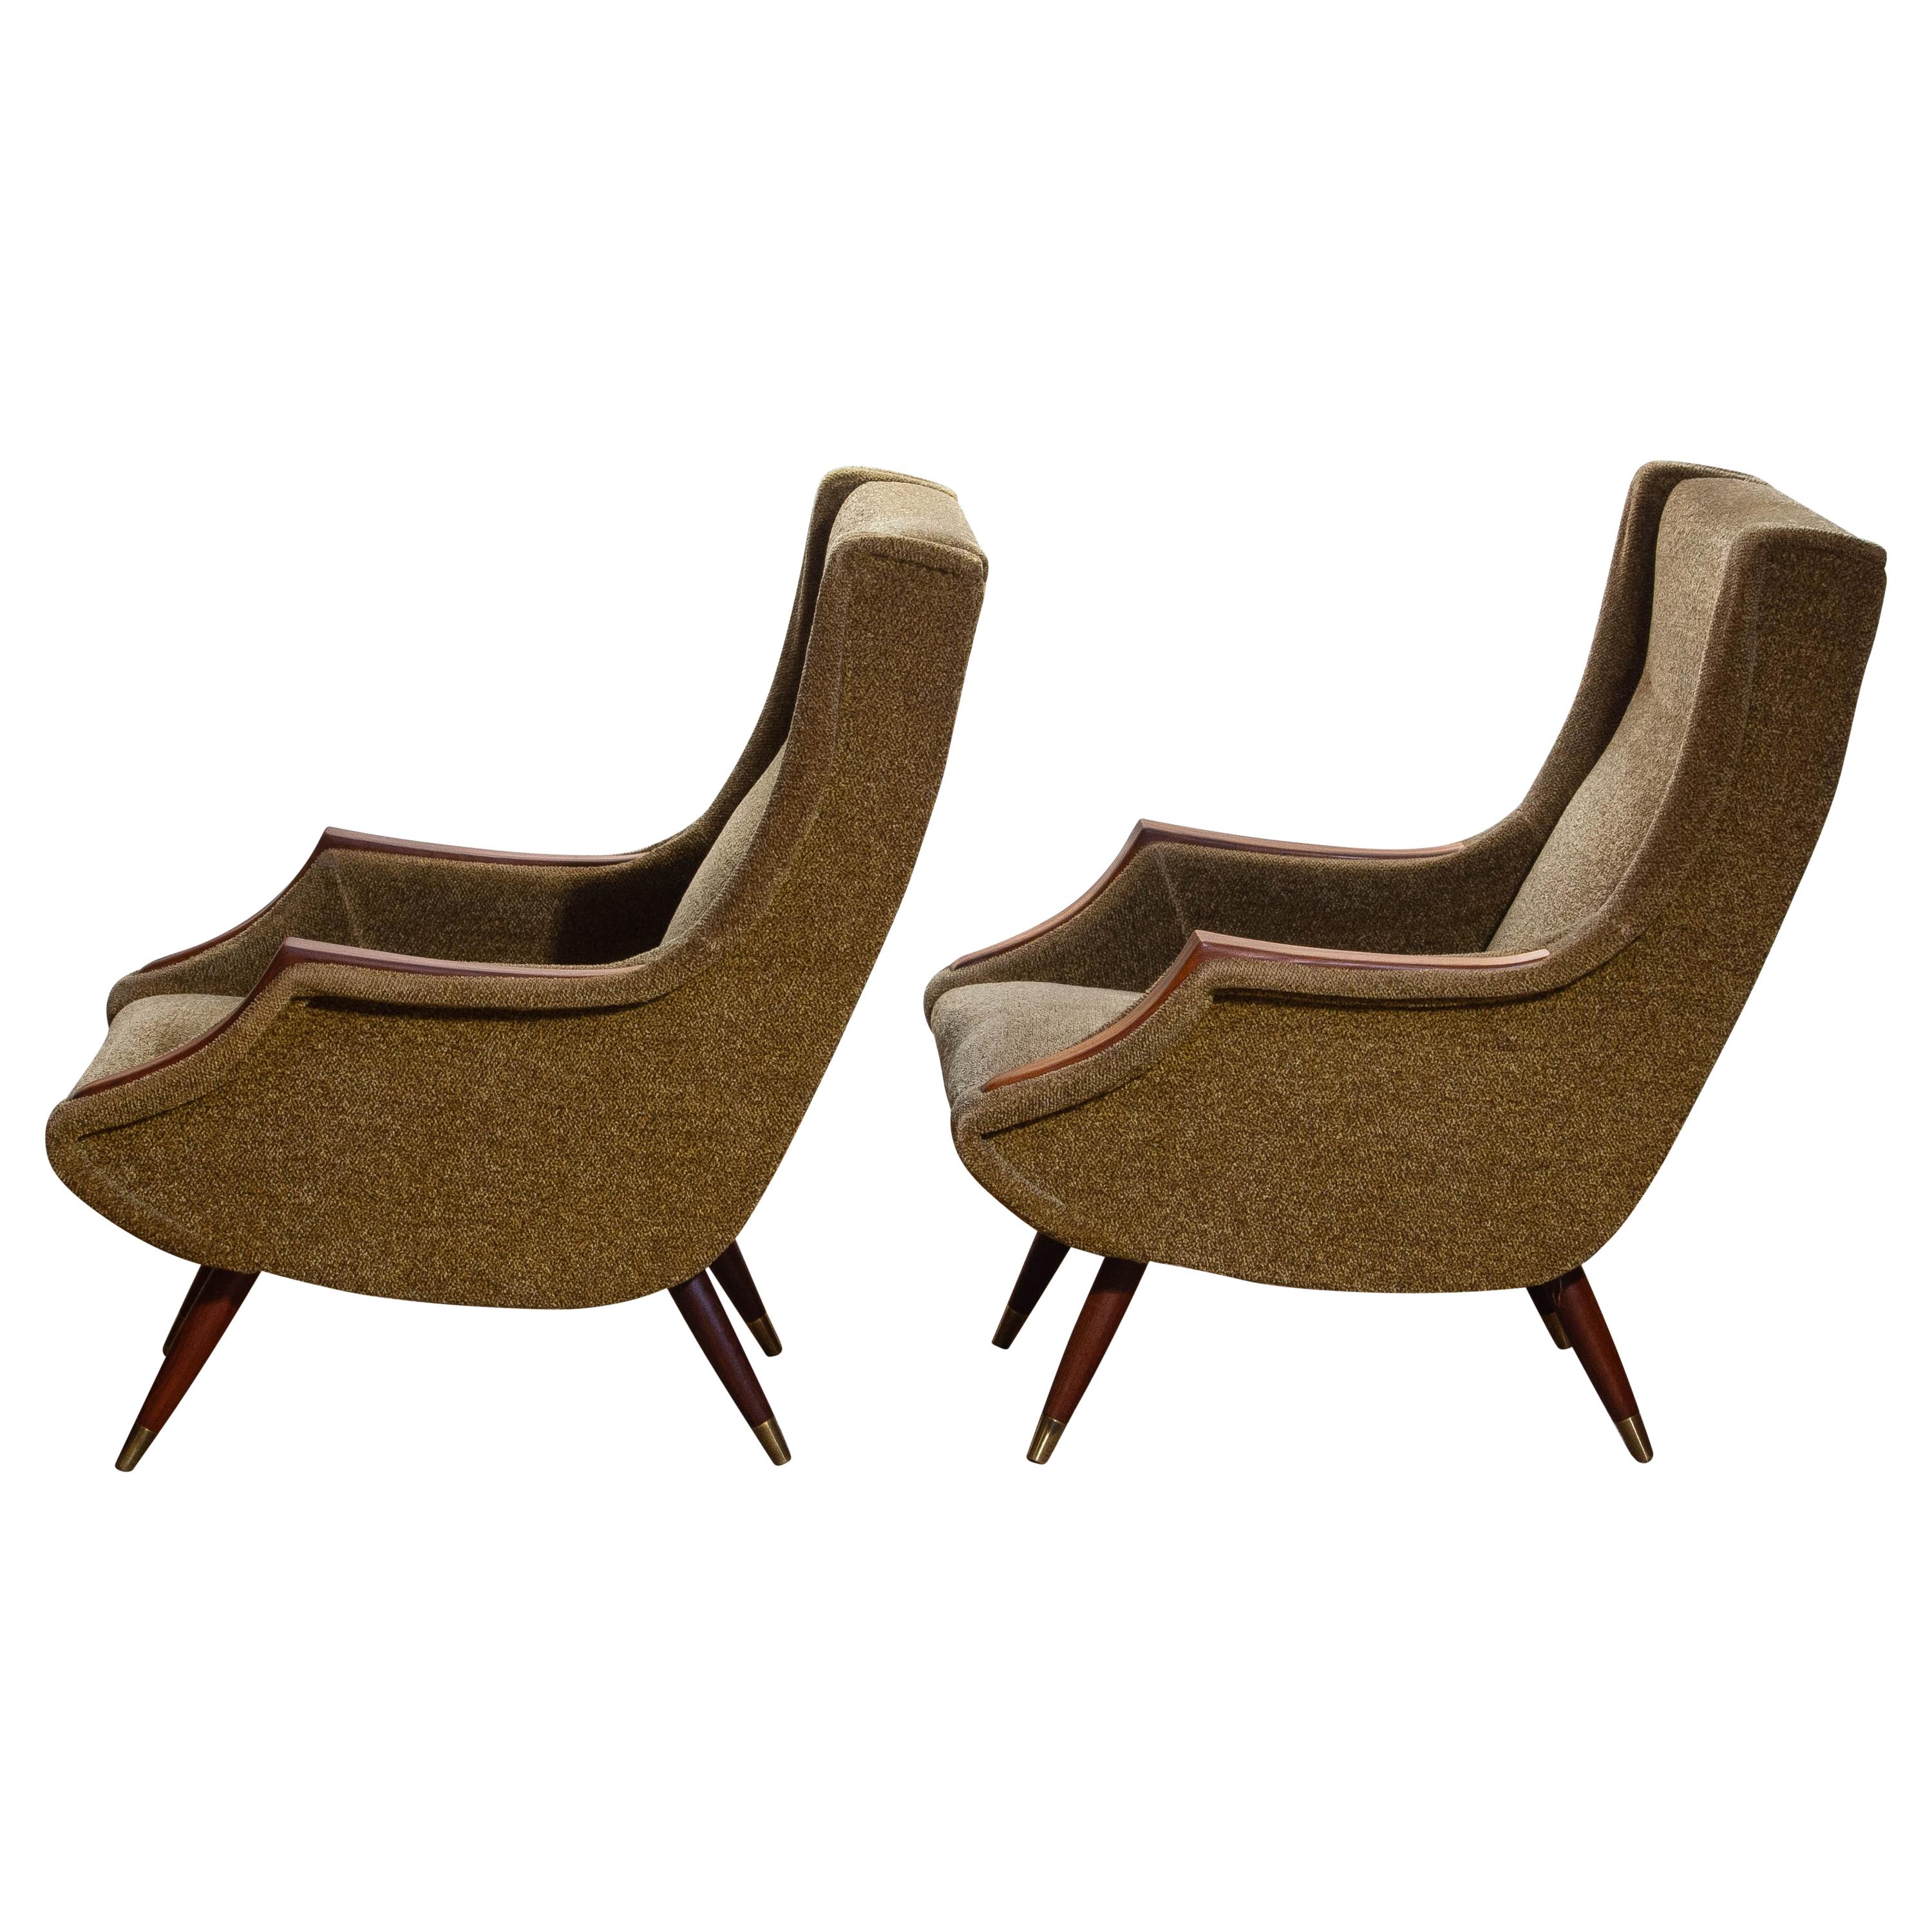 Italian 1950s, Set of Lounge Easy Club Chairs by Aldo Morbelli for Isa Bergamo, Italy